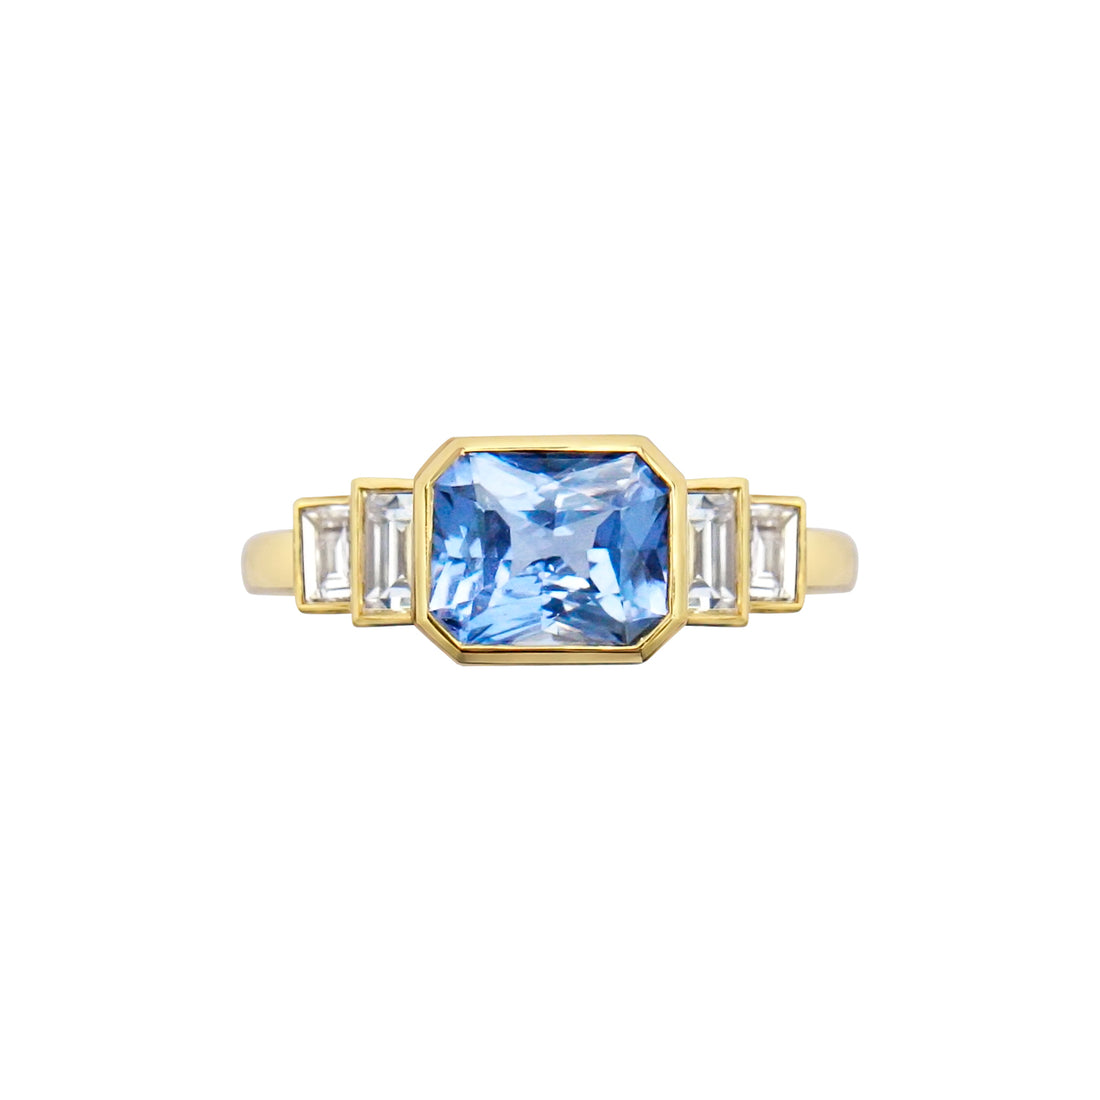  Pale Blue Sapphire and Baguette Diamond Ring by Gee Woods | The Cut London